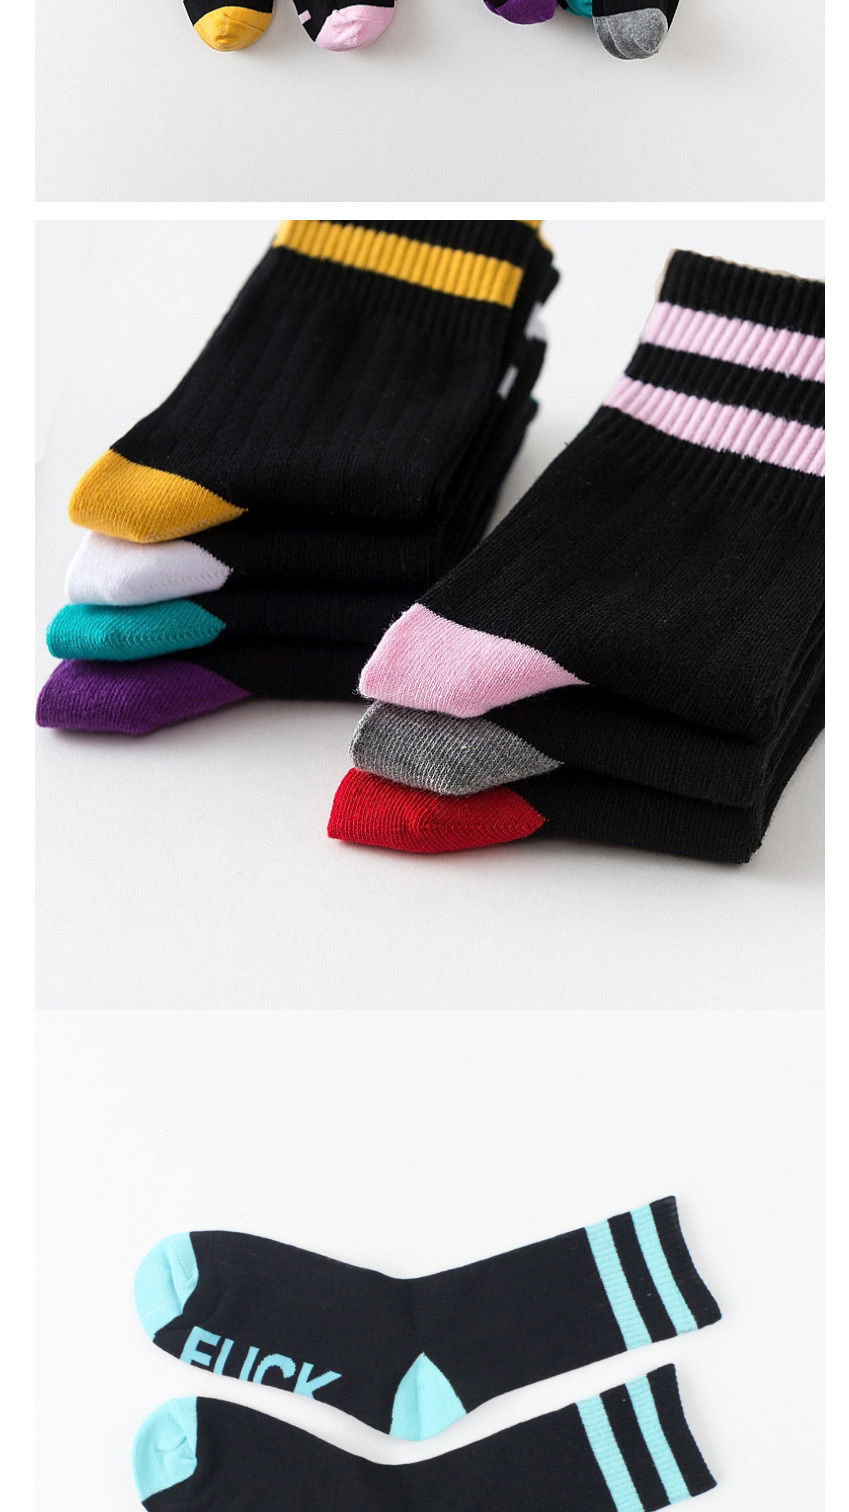 Fashion Gold Color Black Mens Cotton Socks With Contrasting Letters,Fashion Socks